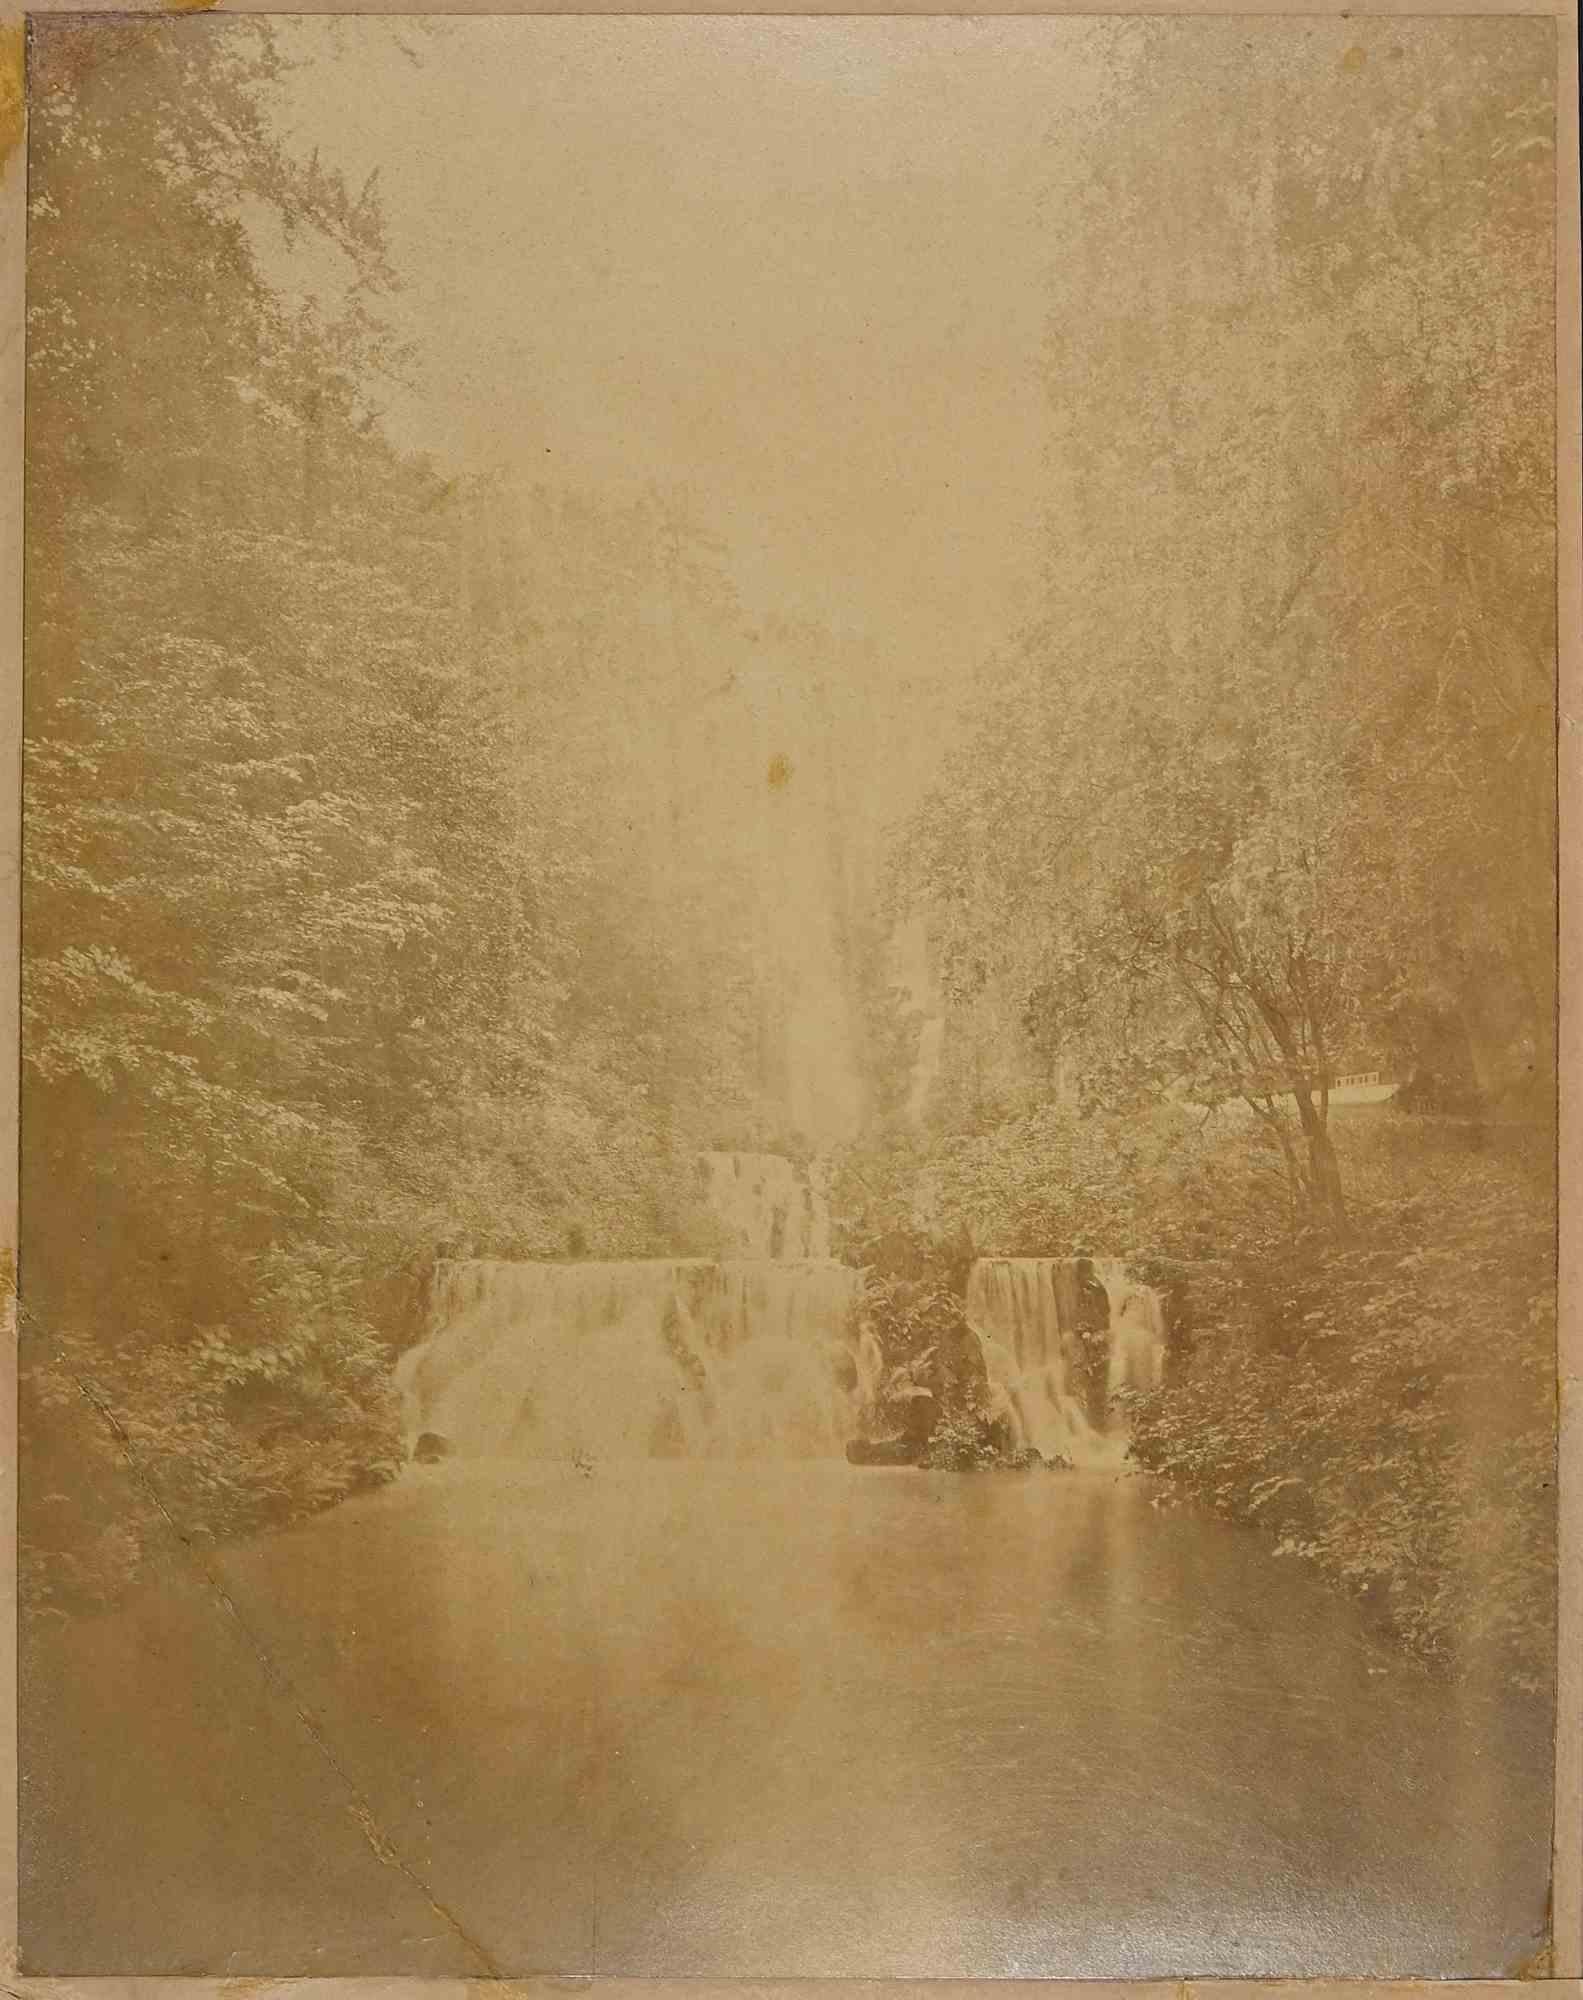 Unknown Landscape Photograph - Fall - Vintage Photograph - Late 19th Century